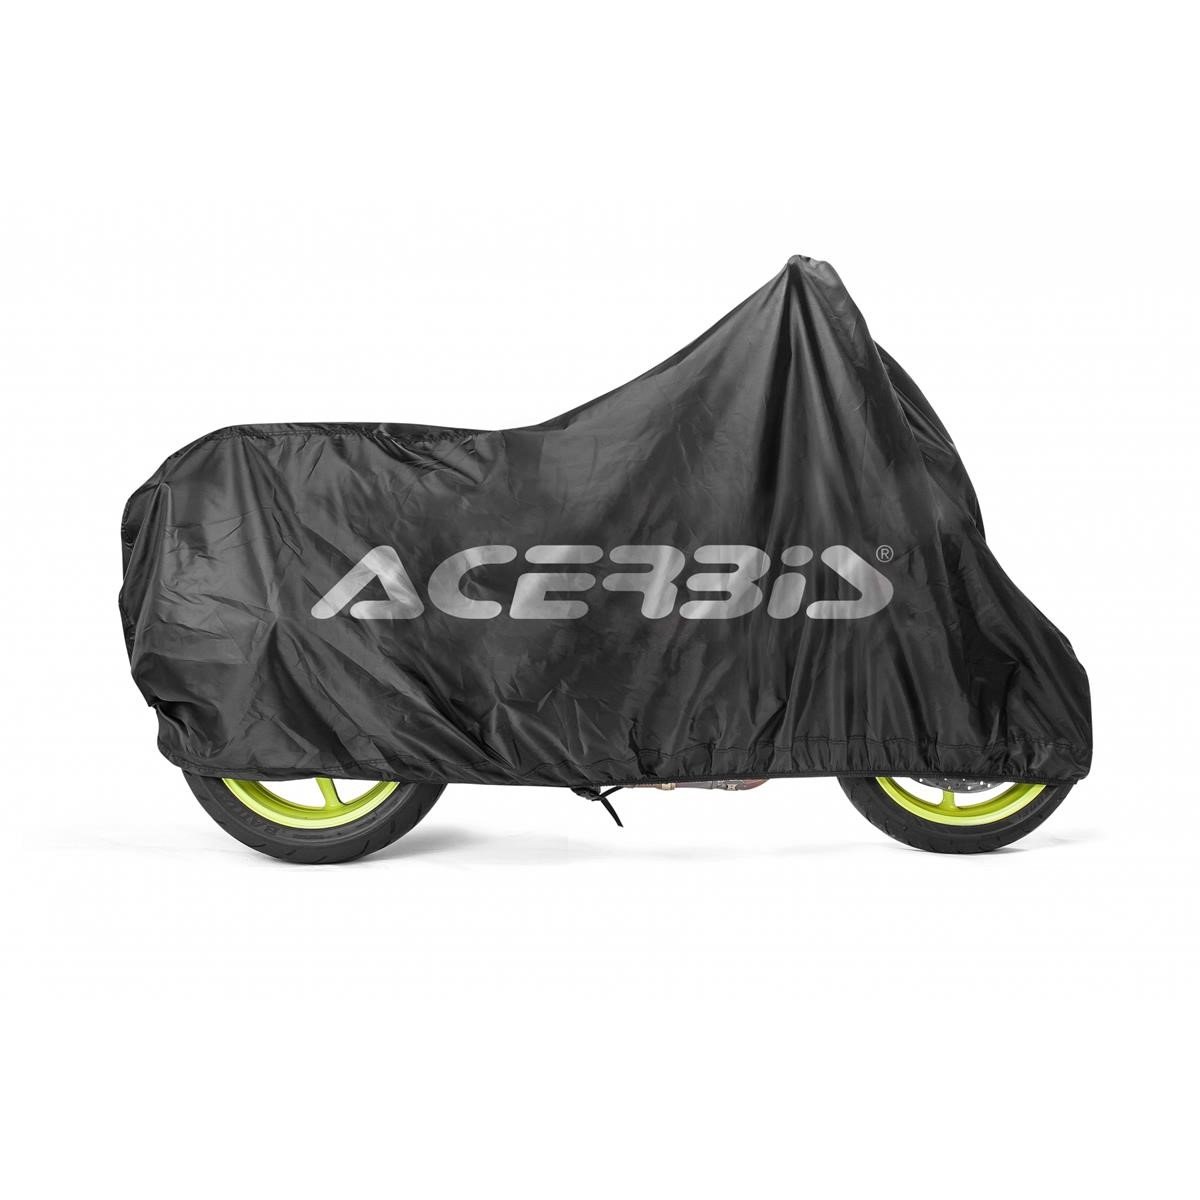 Acerbis Motorcycle Cover  Yellow, Corporate